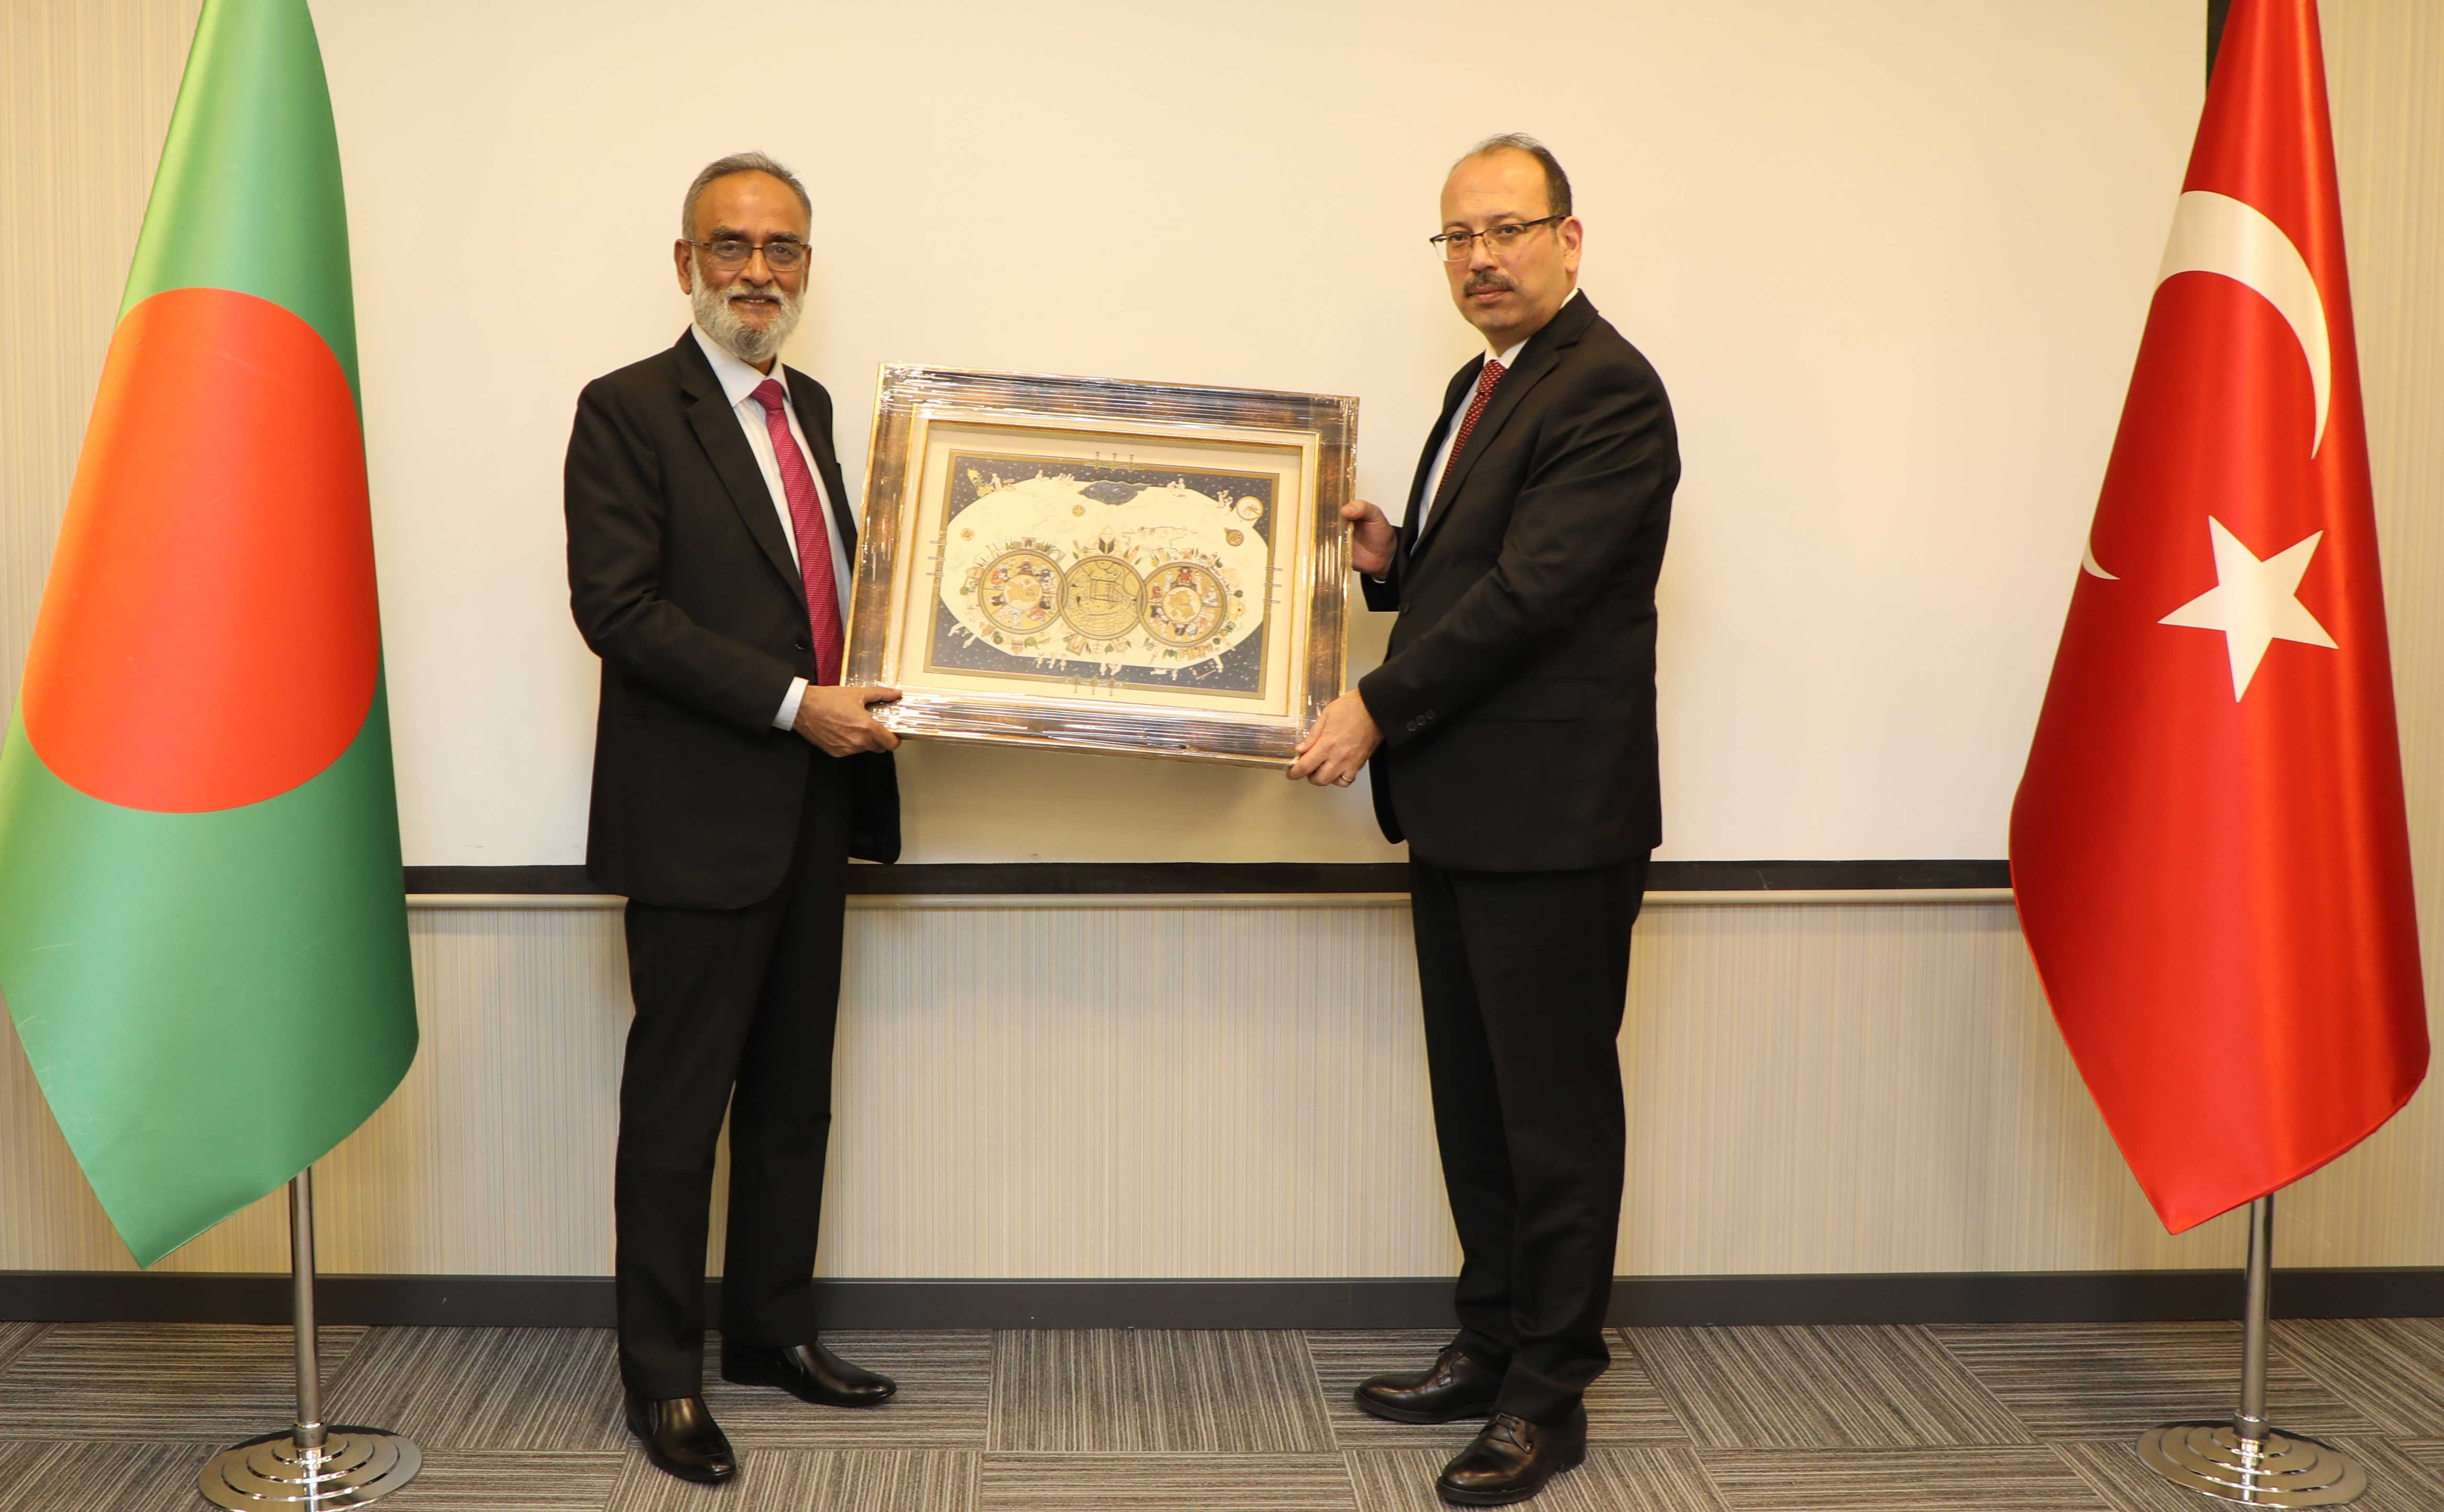 Former CAG of Bangladesh, Mr. Mohammad Muslim Chowdhury receives a souvenir from President, Turkish Court of Accounts, Mr. Metin Yener after MoU signing ceremony in Ankara, Turkey